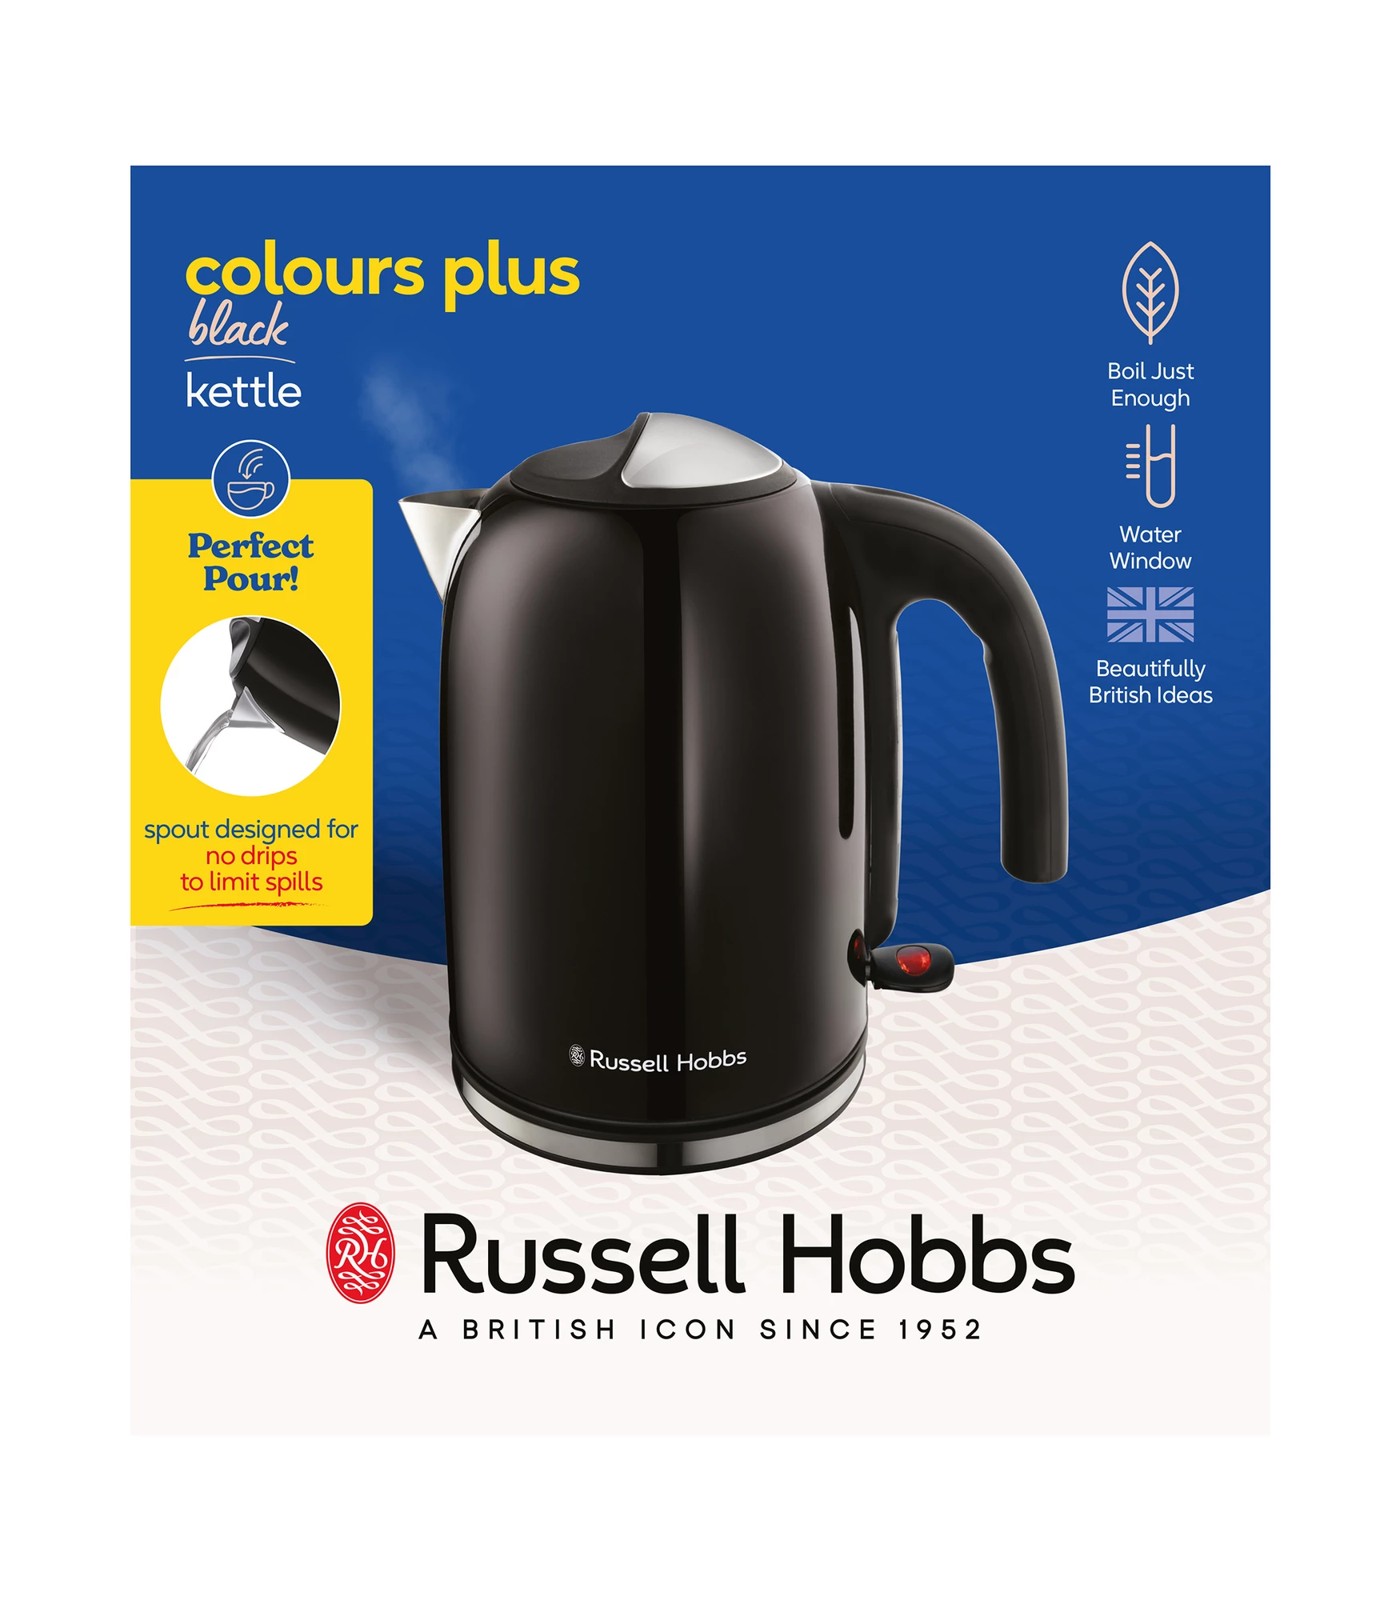 Russell Hobbs Electric Kettle : Target